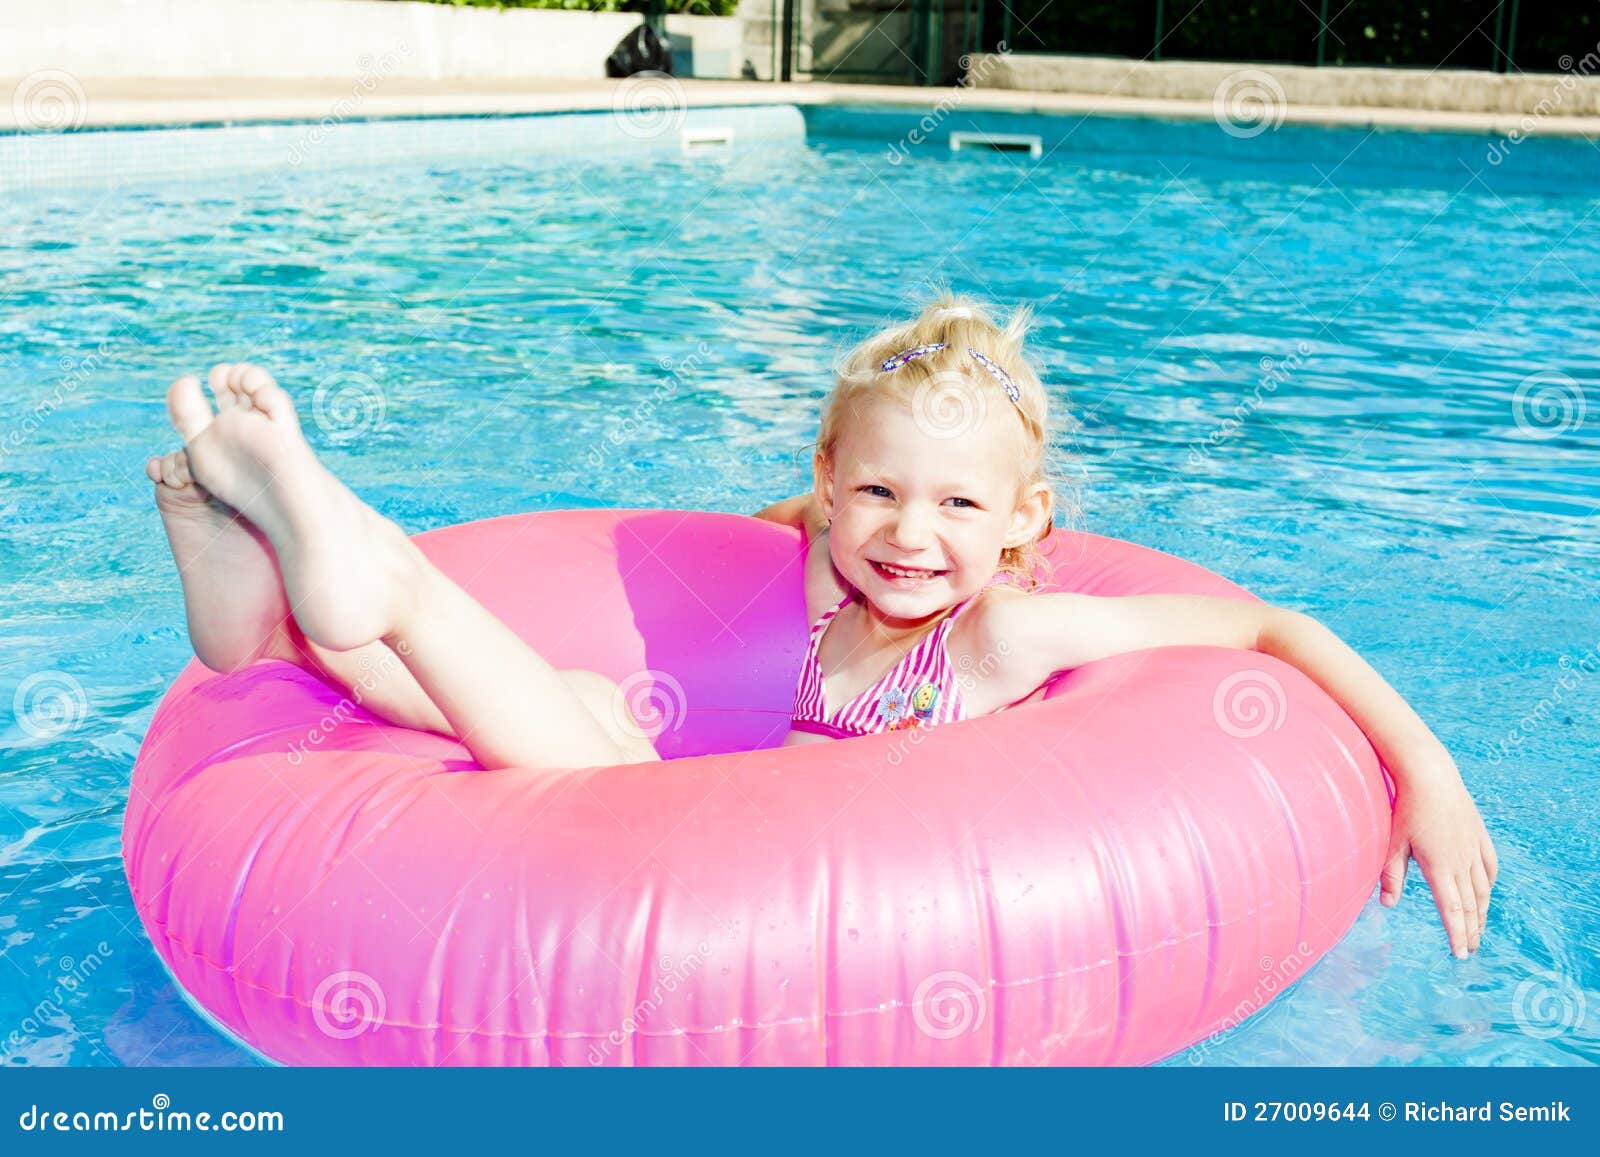 Little Girl In Swimming Pool Stock Photos - Image: 27009633